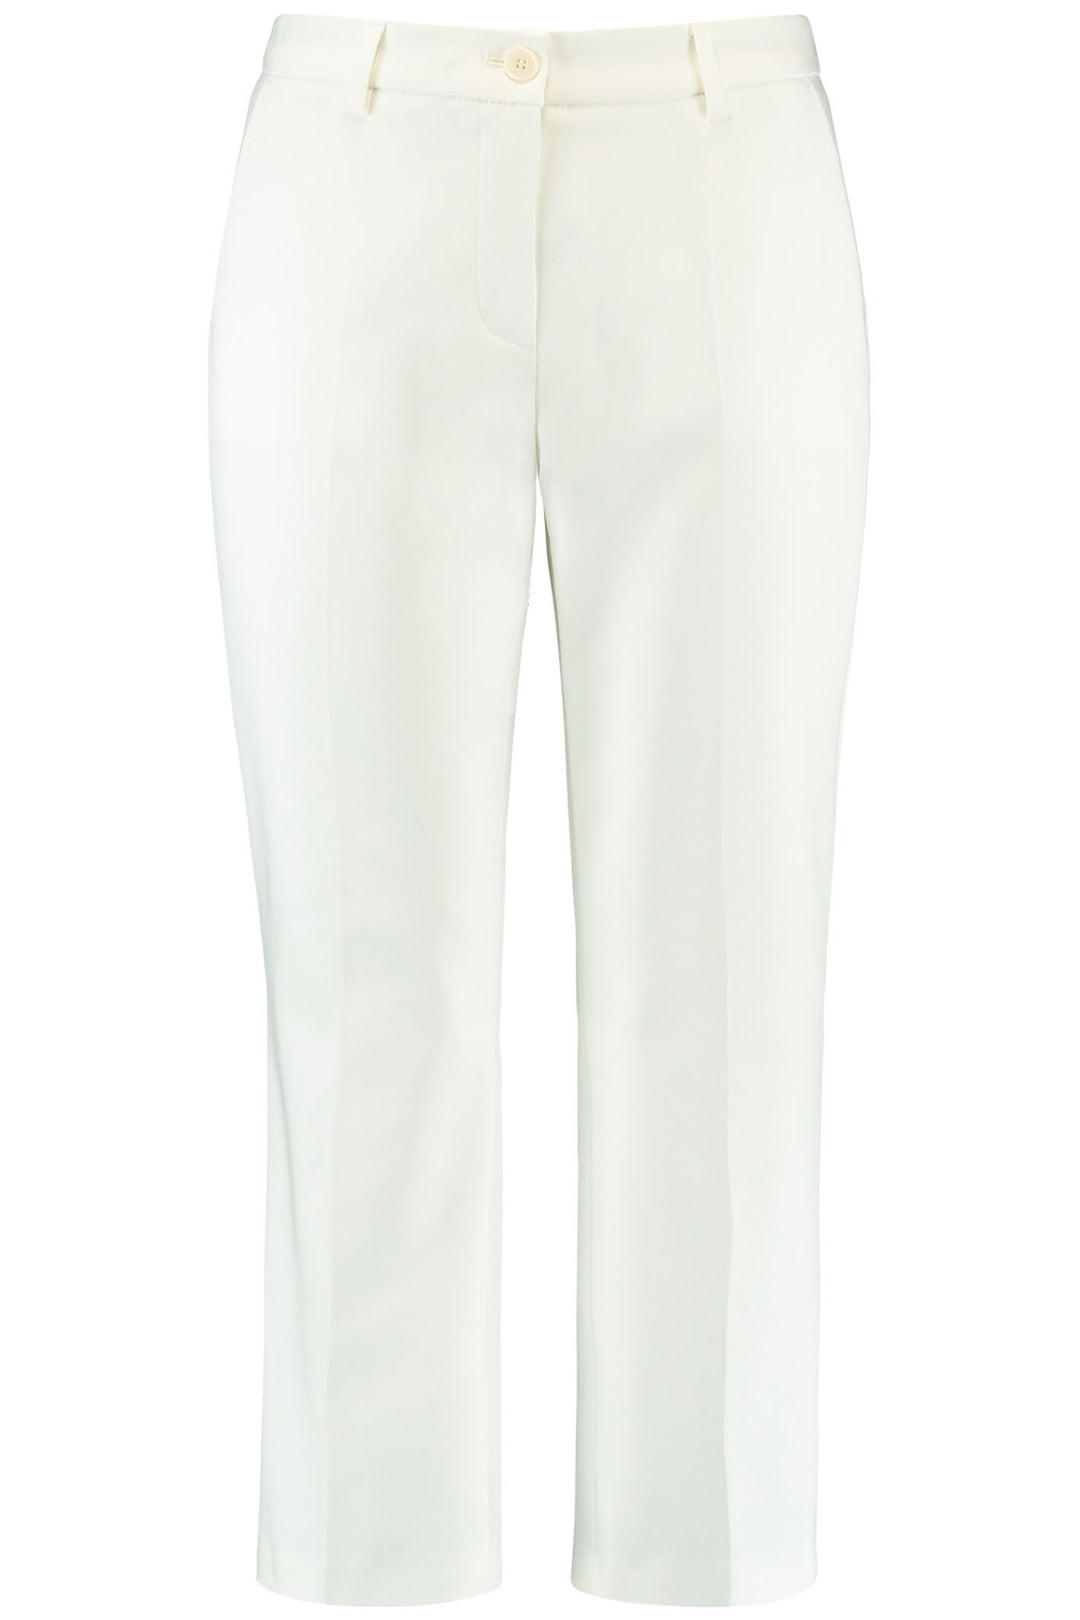 Gerry Weber 222087-66252 Whisper White Trousers - Dotique Chesterfield